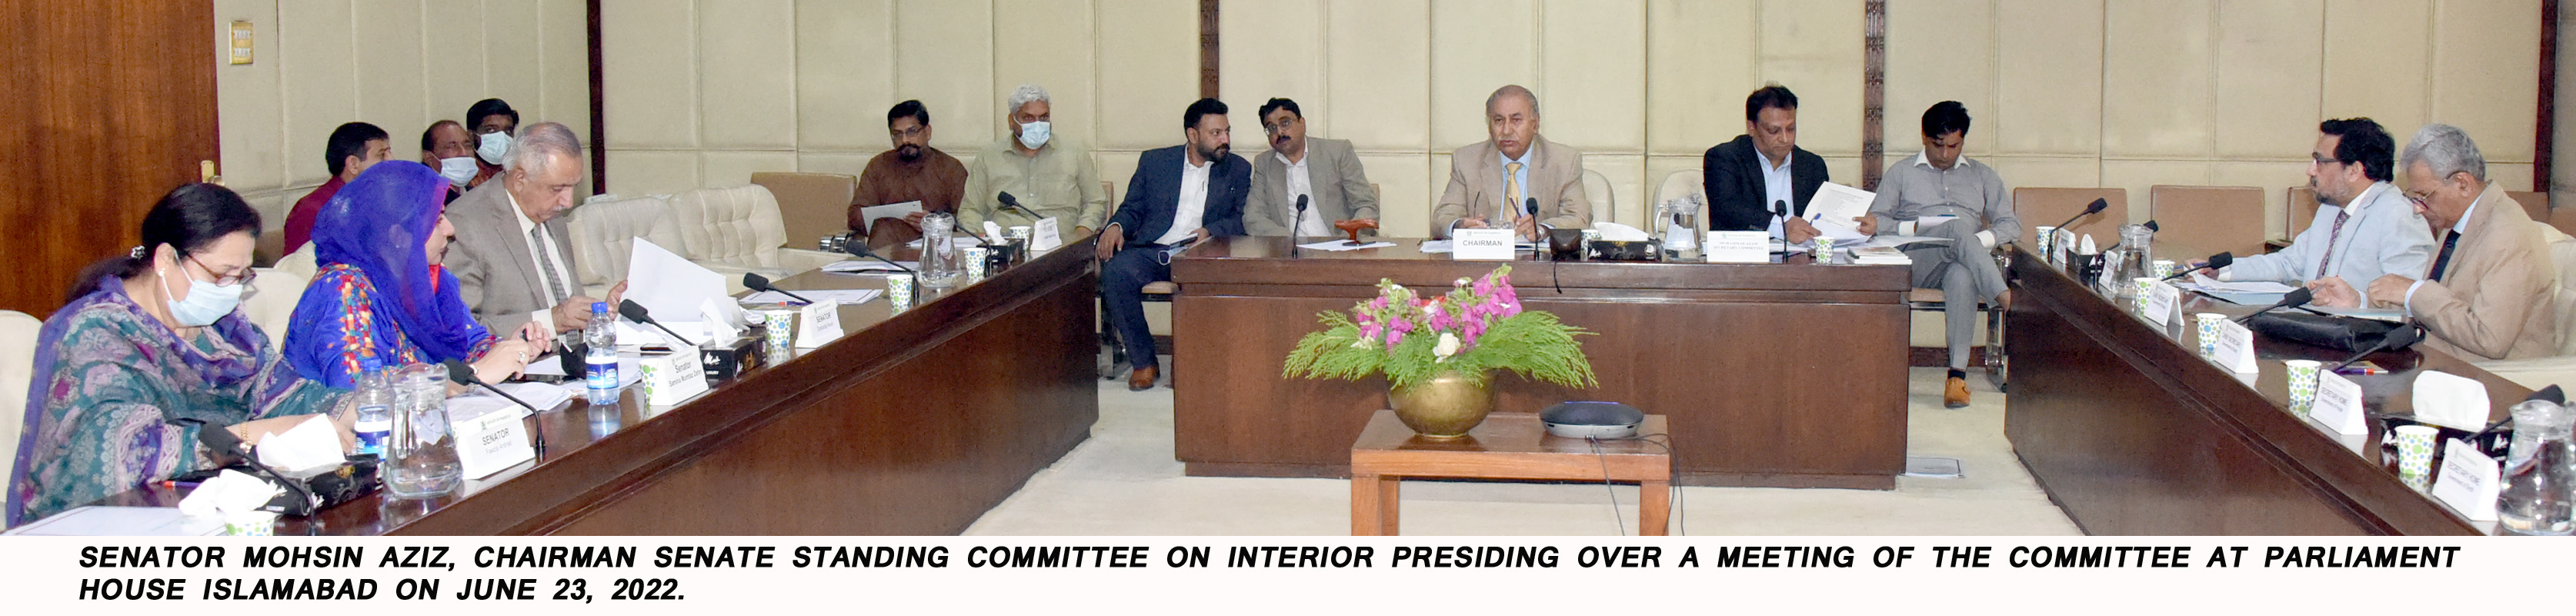 Senator Mohsin Aziz presiding over a meeting of the Senate Standing Committee on Interior, at Parliament House Islamabad on 23 June 2022.